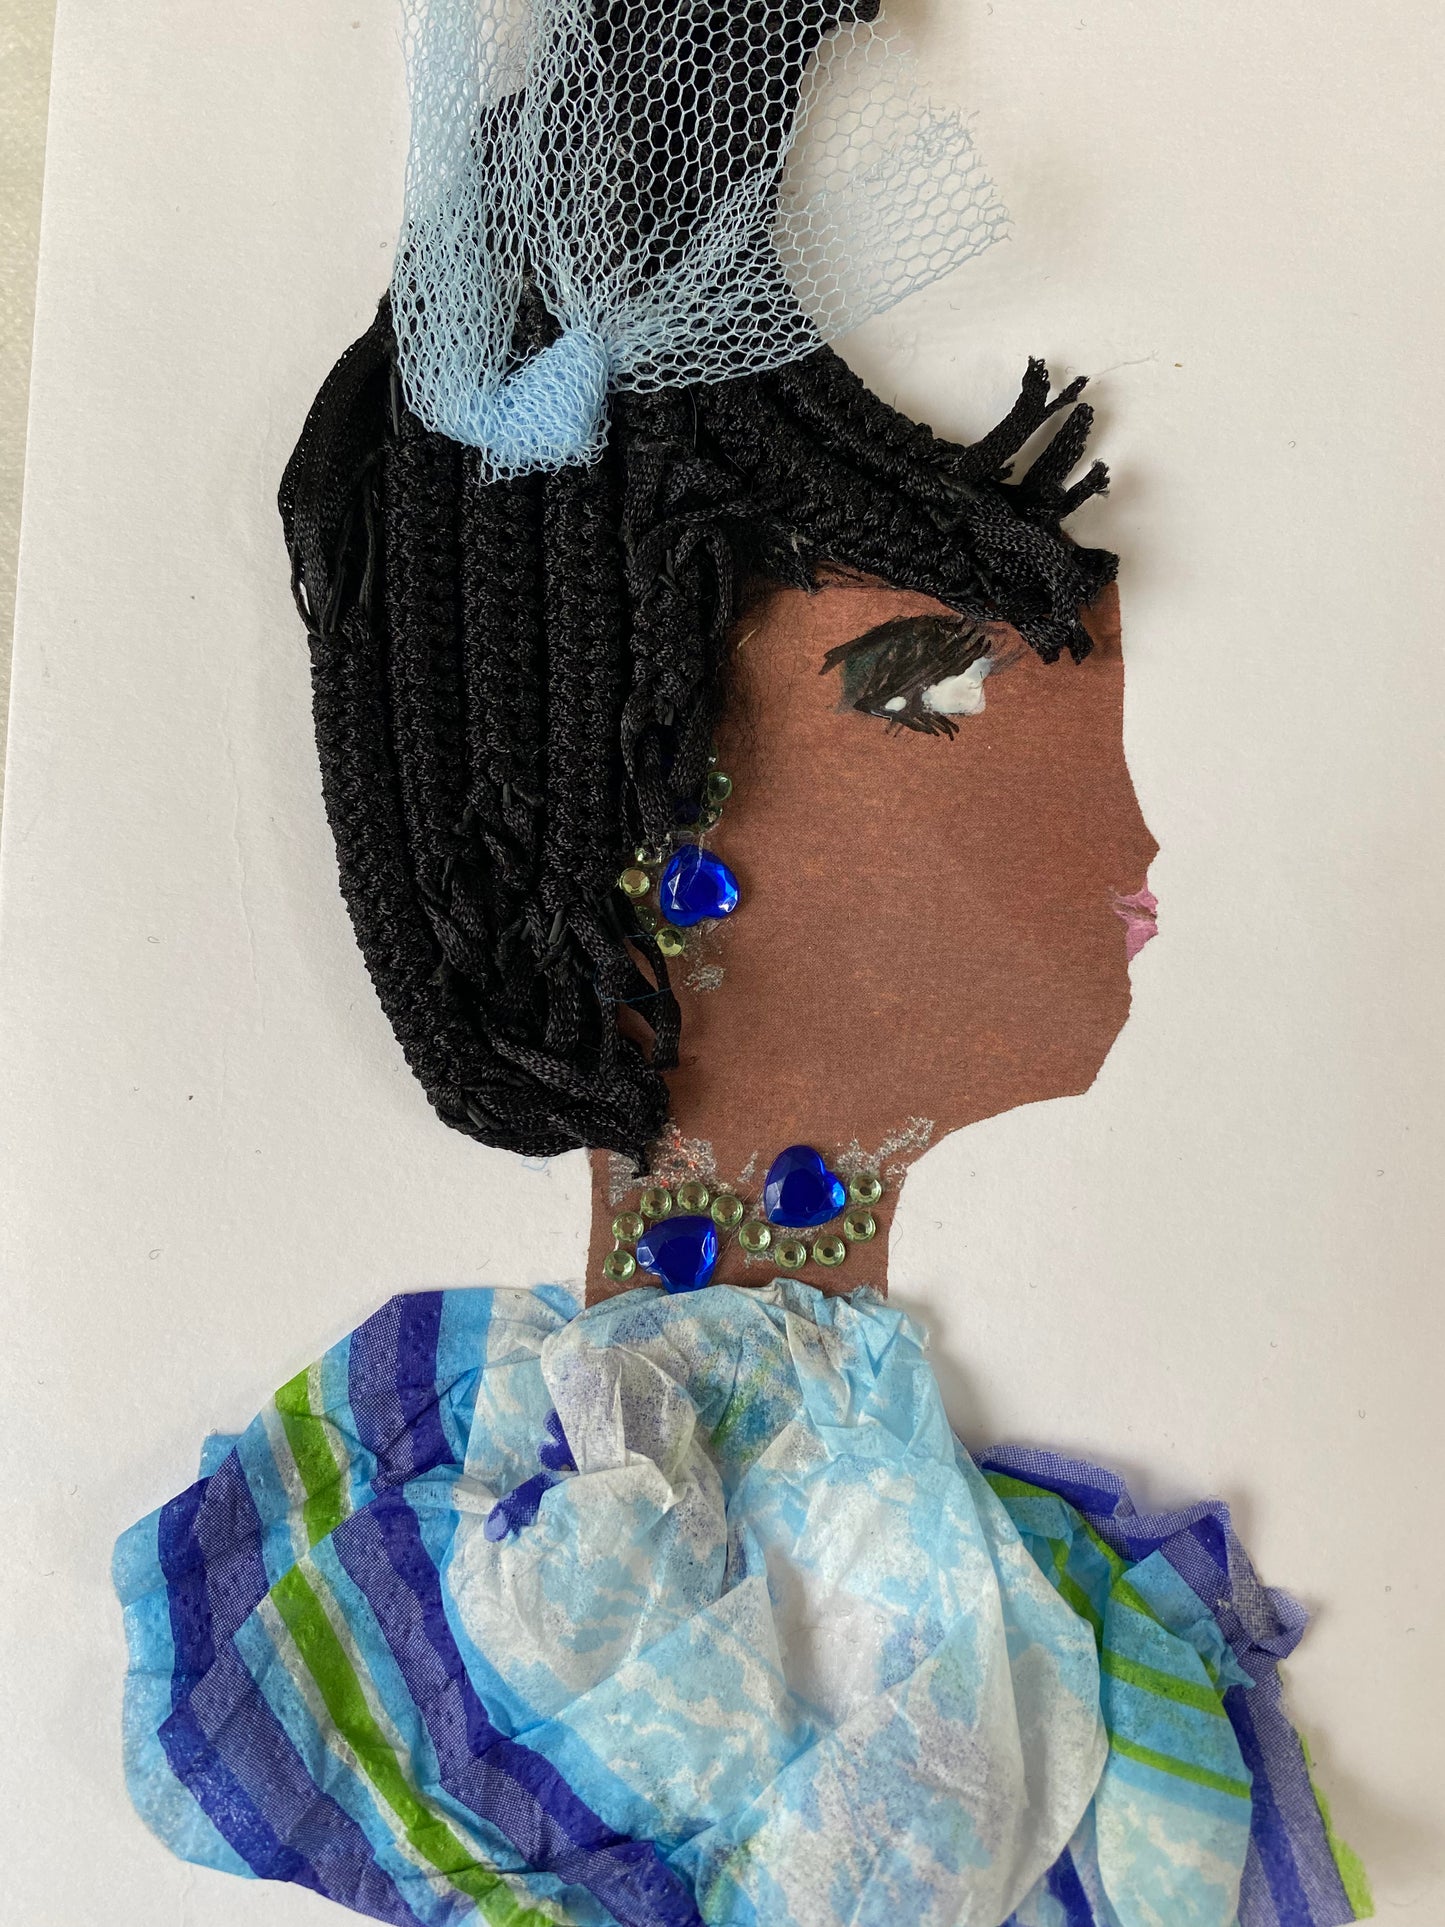 I designed this card of a woman named Bridget Blue. She has a brown skin tone who wears a blue fascinator hatinator. She wears a blue stripe blouse with darling blue jewellery.This handmade card shows a woman wearing a blue-hatinator and a blue-striped blouse with coordinating blue accessories.